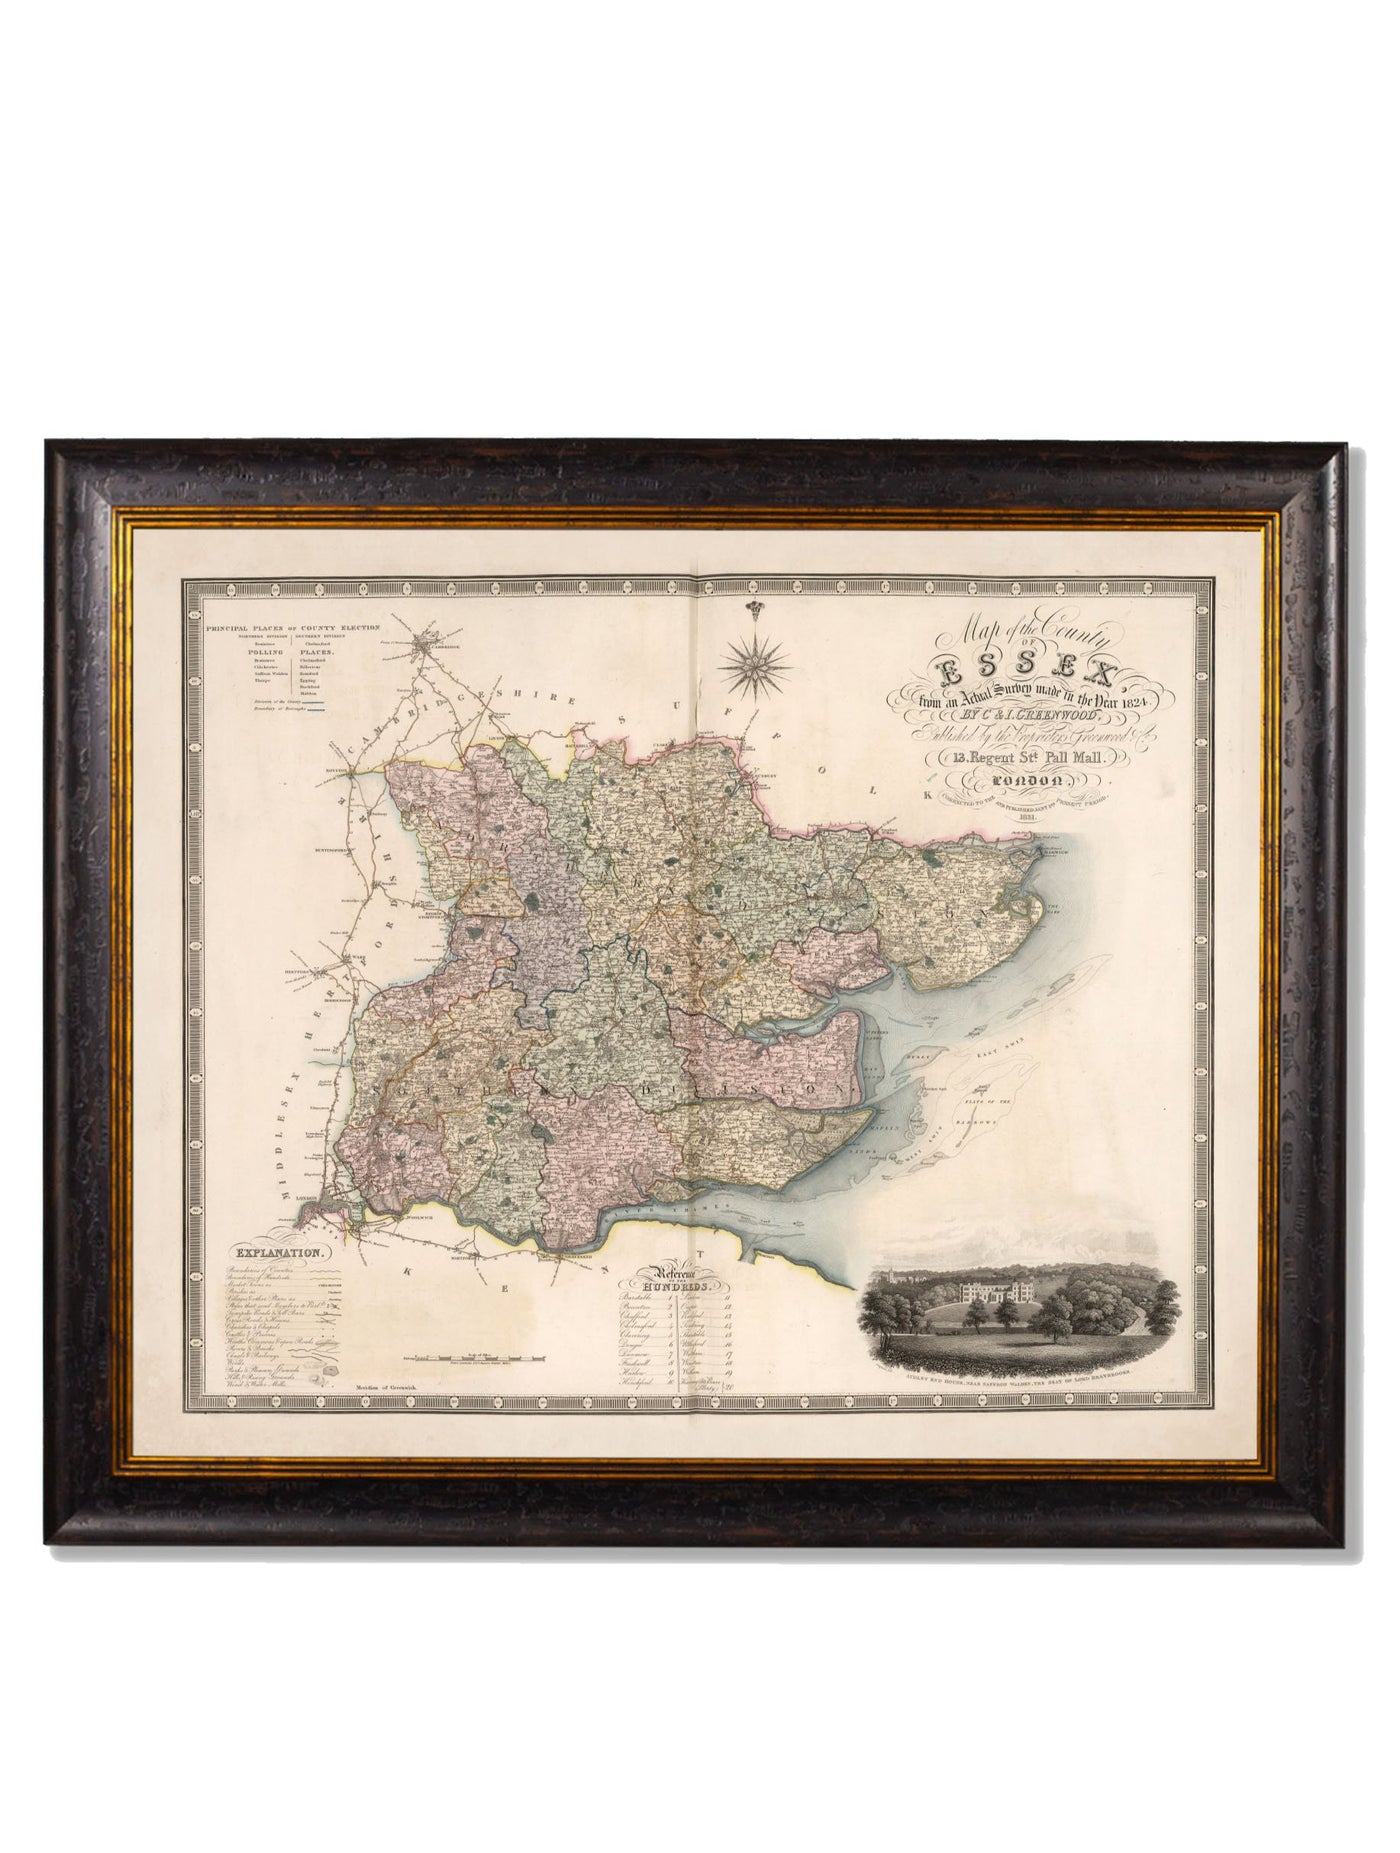 C.1830 County Maps of England - TheArtistsQuarter